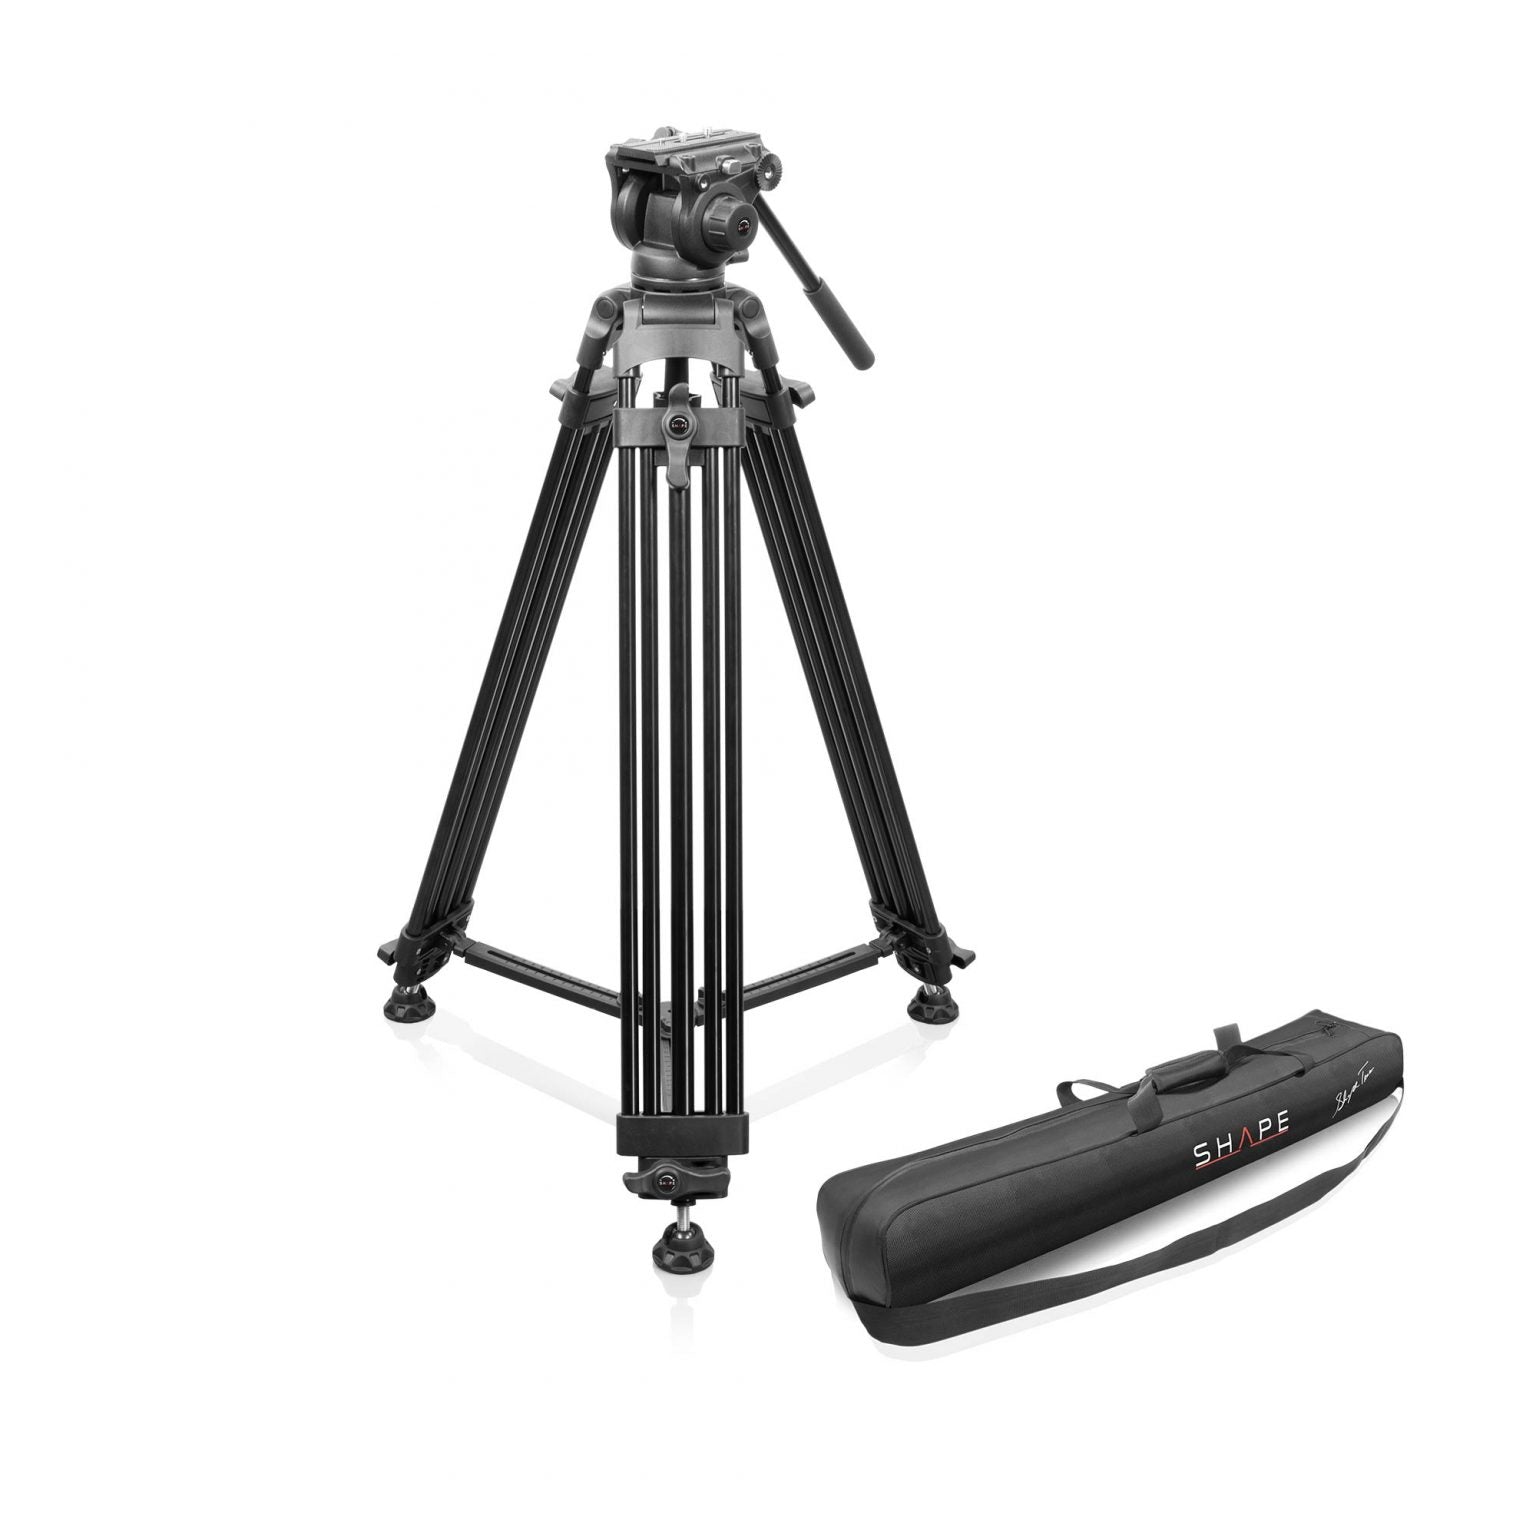 SHAPE Tripod 3-Stage Video with Fluid Head and Bag